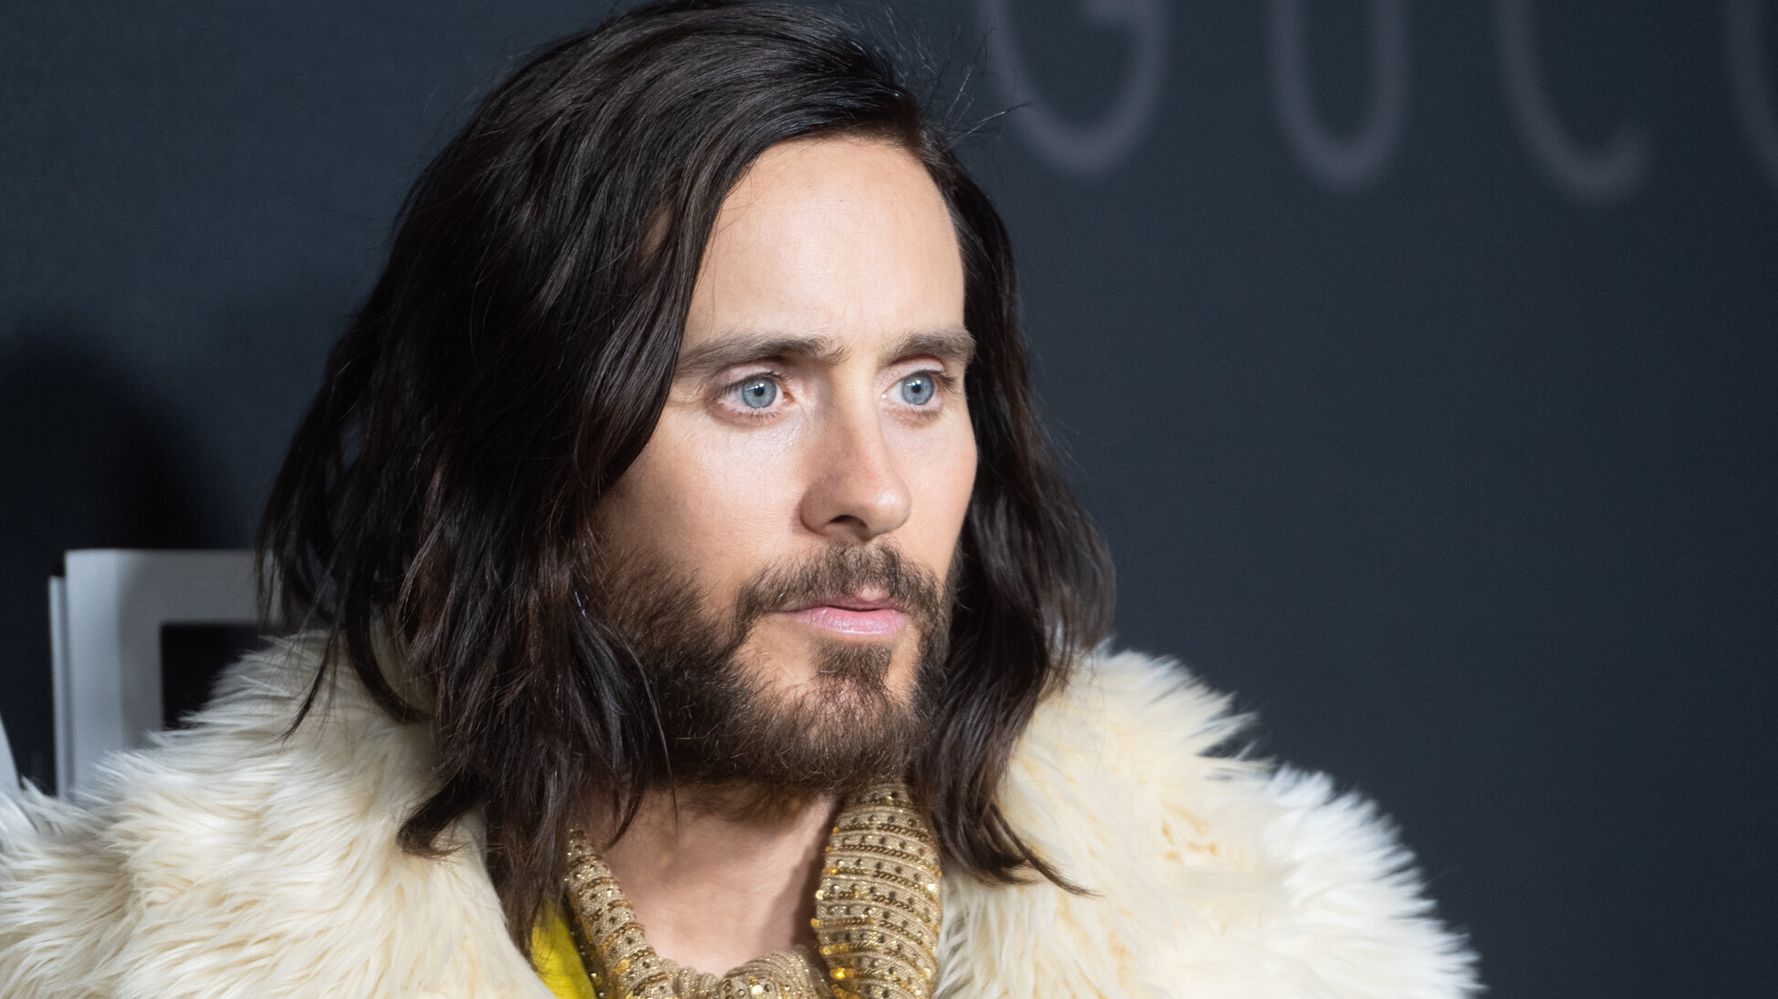 Jared Leto Says 'House Of Gucci' Role Had Him 'Snorting Lines Of Arrabbiata Sauce' - HuffPost